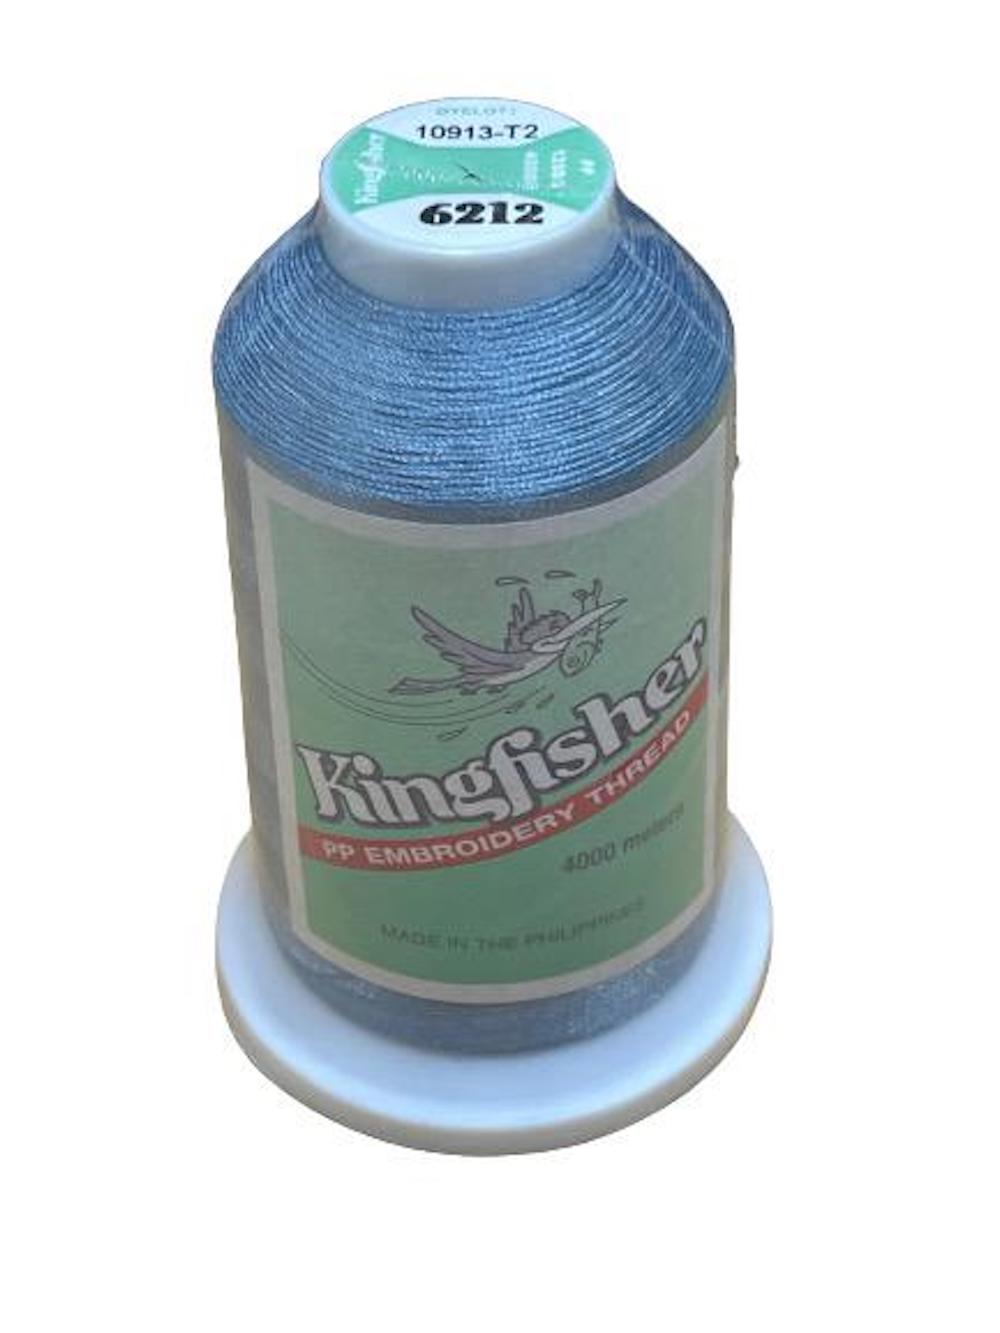 King Fisher Embroidery Thread 4000m 6212 - MY SEWING MALL